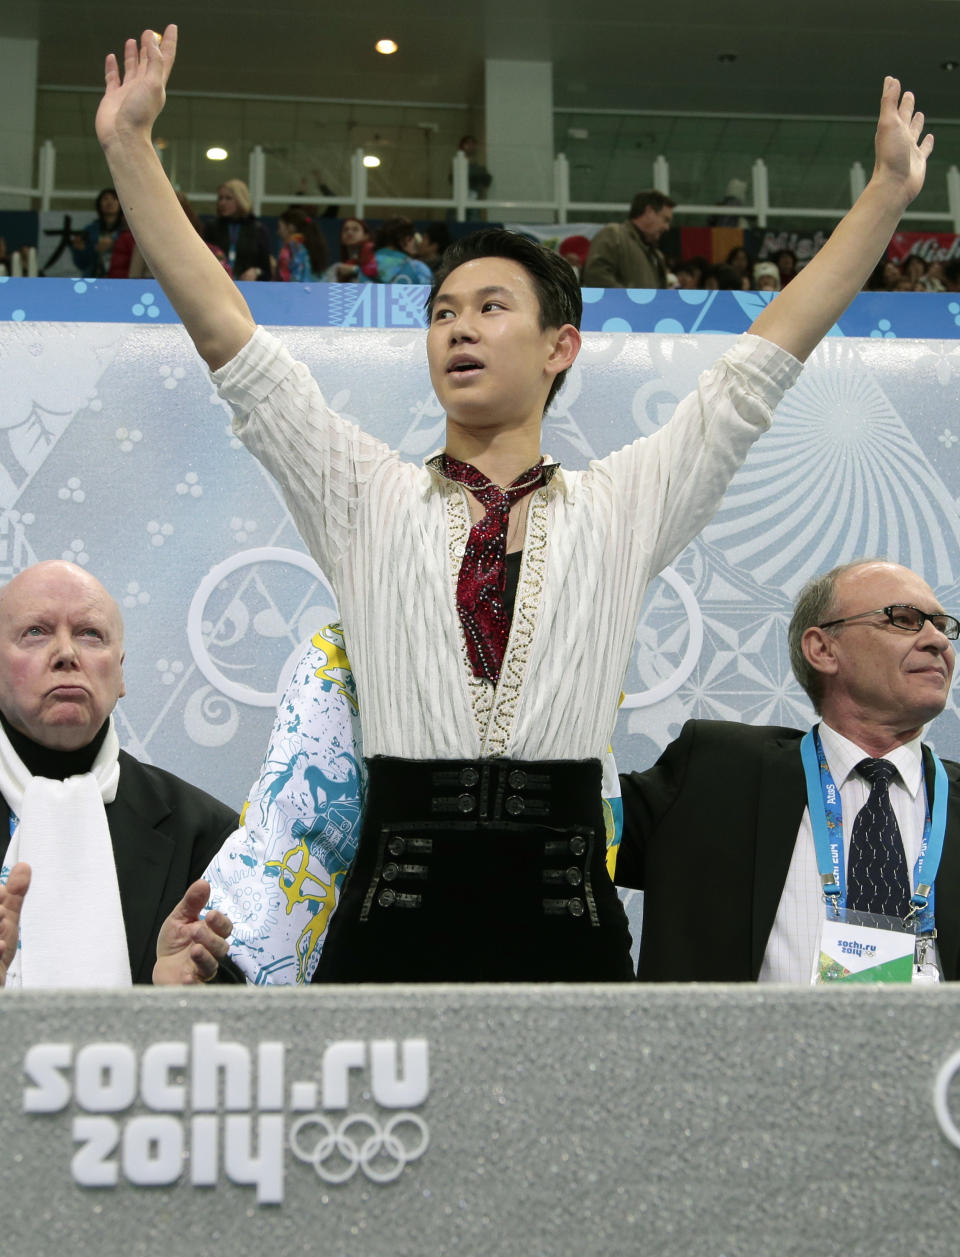 Denis Ten of Kazakhstan, centre, waves to spectators from the results area after the men's free skate figure skating final at the Iceberg Skating Palace at the 2014 Winter Olympics, Friday, Feb. 14, 2014, in Sochi, Russia. (AP Photo/Ivan Sekretarev)